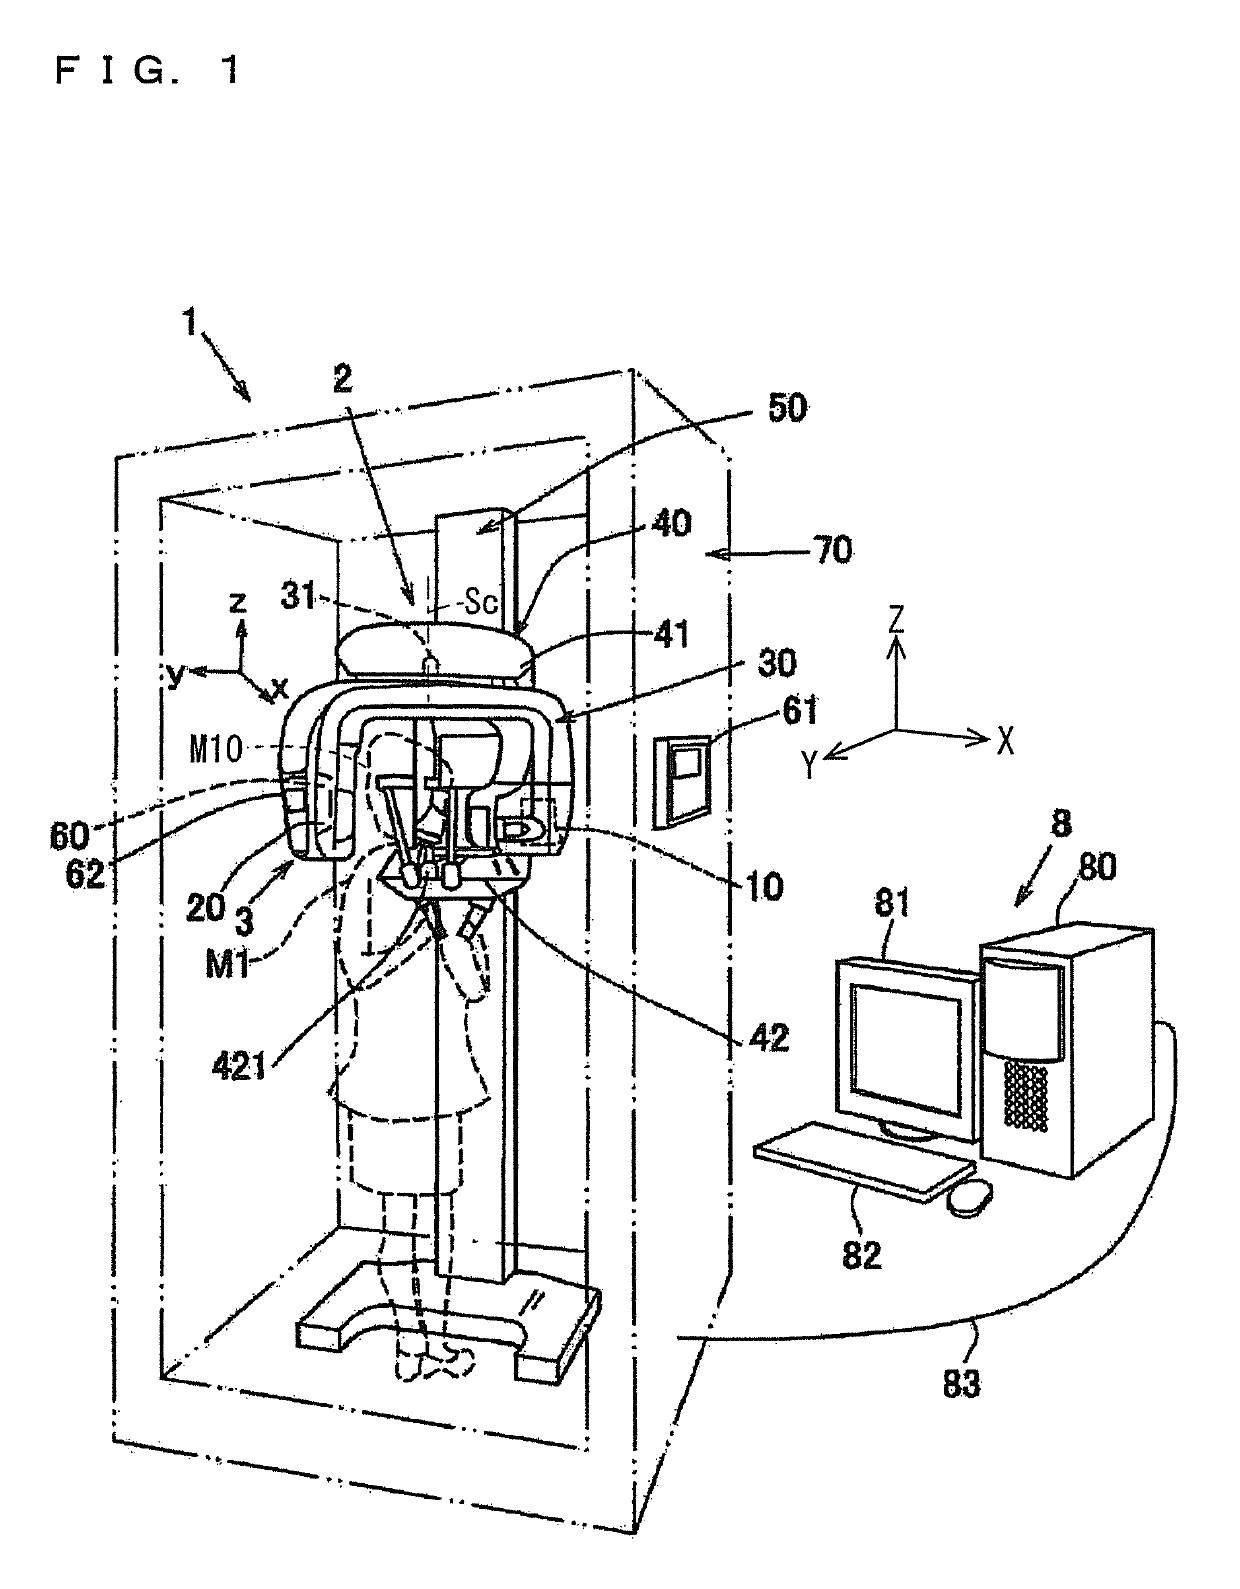 Medical X-ray photography apparatus for pseudo intraoral radiography with user interface with rectangular frame lines